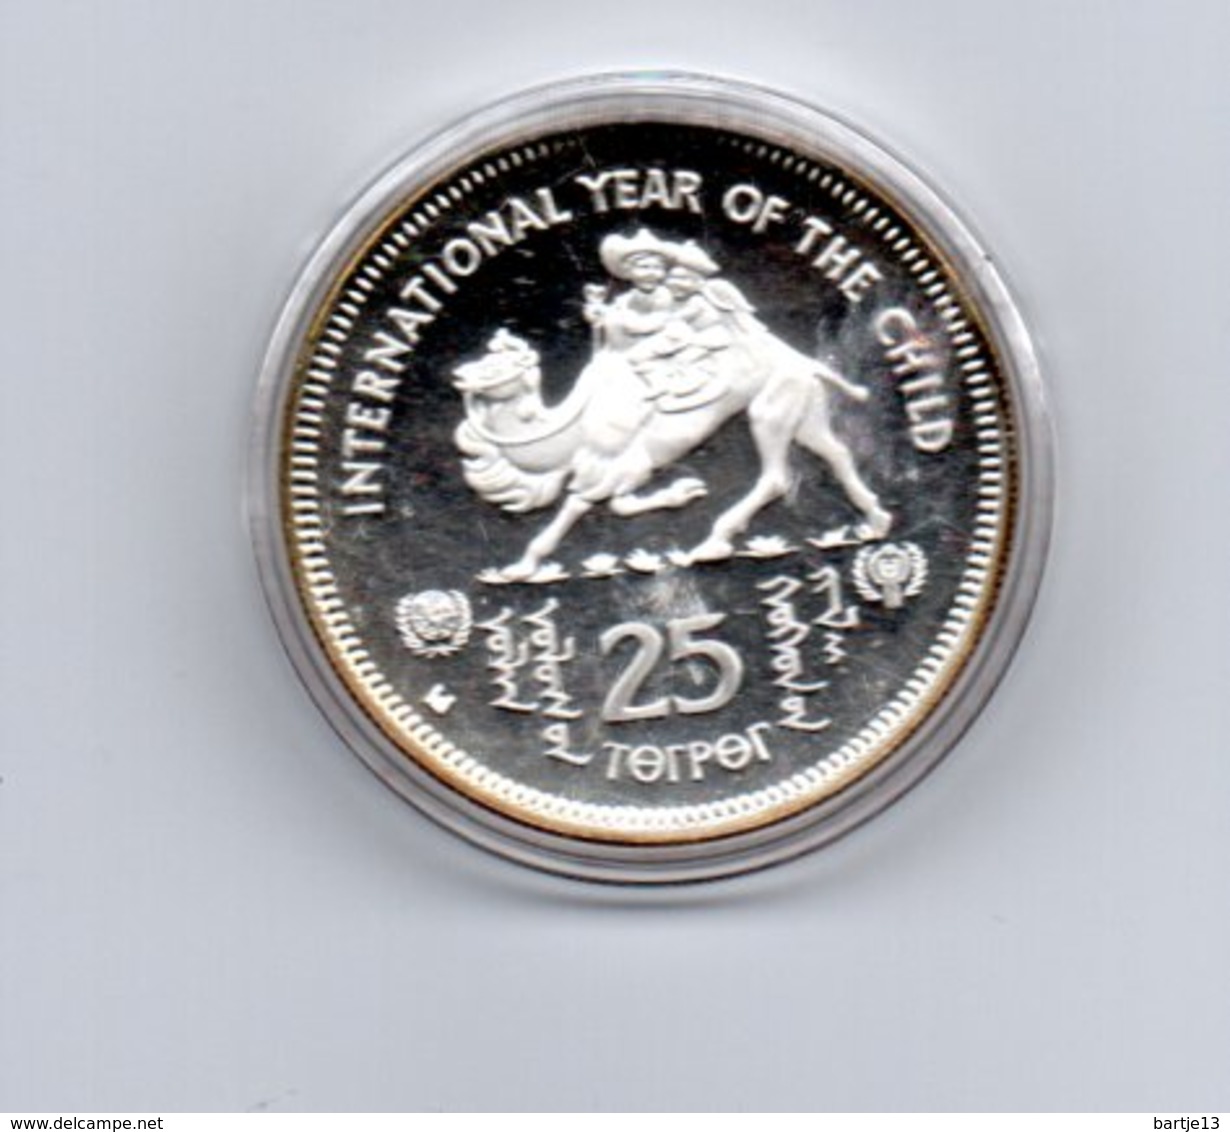 MONGOLIE 25 TUGRIK 1980 ZILVER PROOF YEAR OF THE CHILD CAMEL KAMEEL DAMAGE ONLY ON CAPSEL - Mongolei